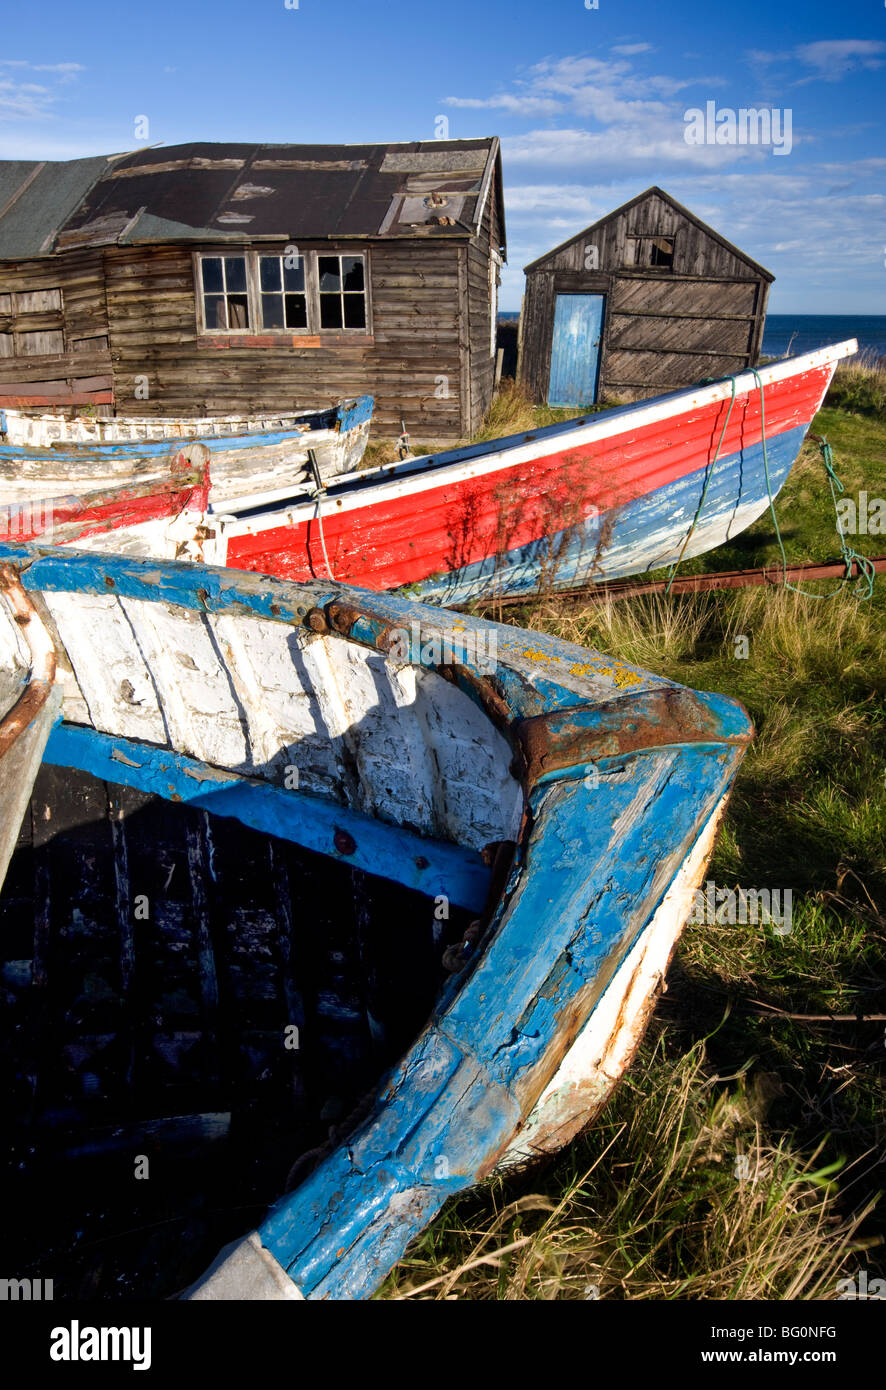 Old fishing boats and delapidated fishermens huts, Beadnell, Northumberland, England, United Kingdom, Europe Stock Photo